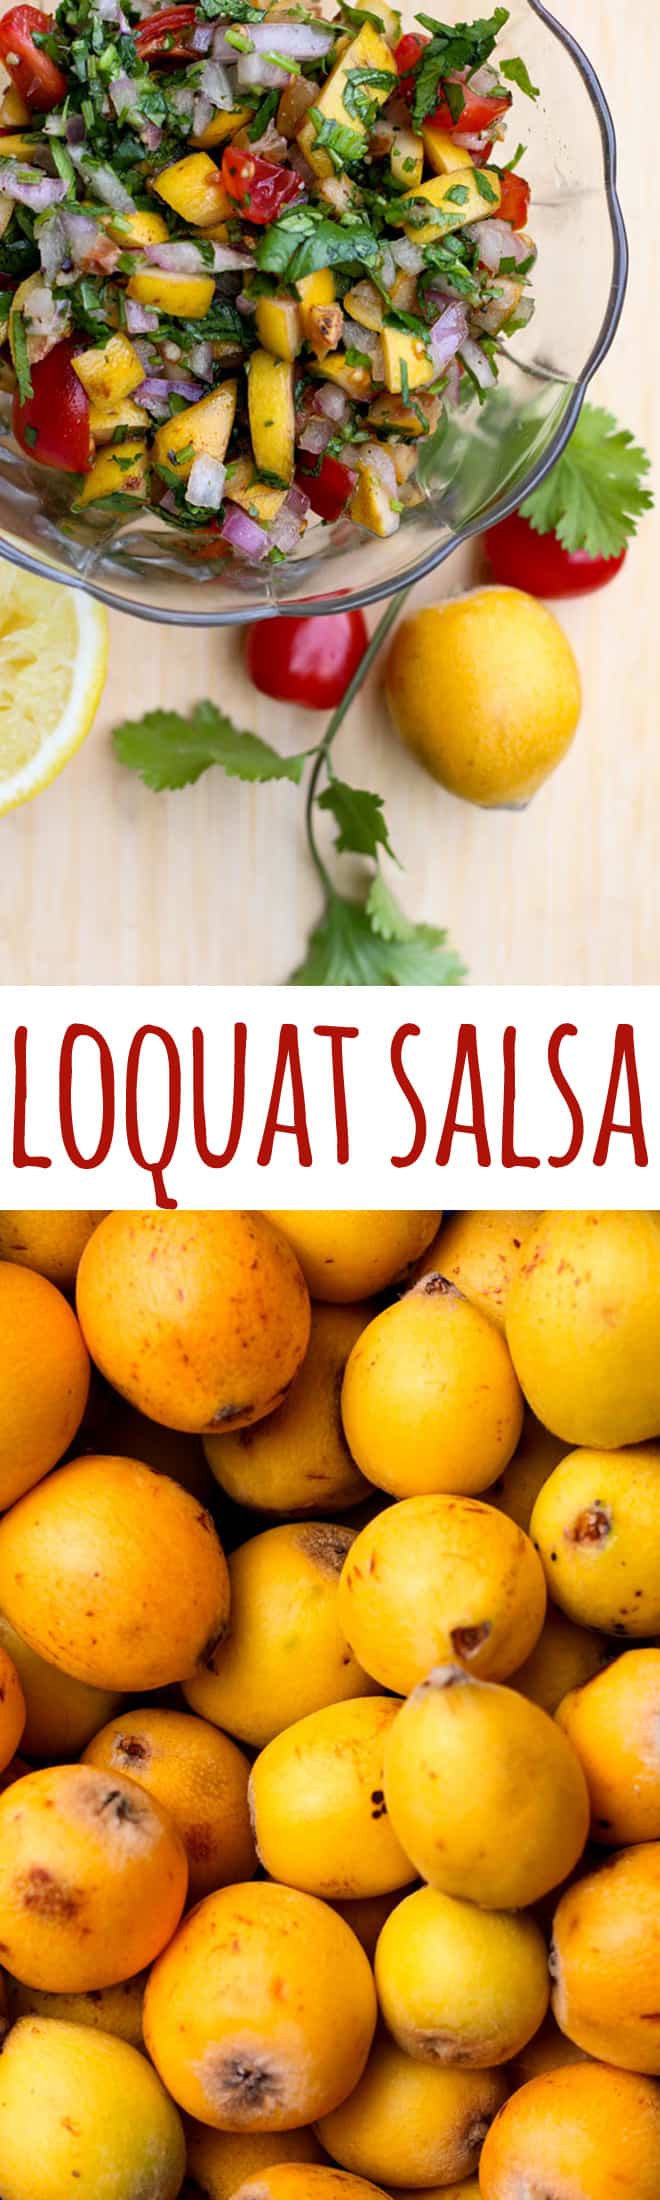 Sharp and tangy loquats are great in this simple salsa.